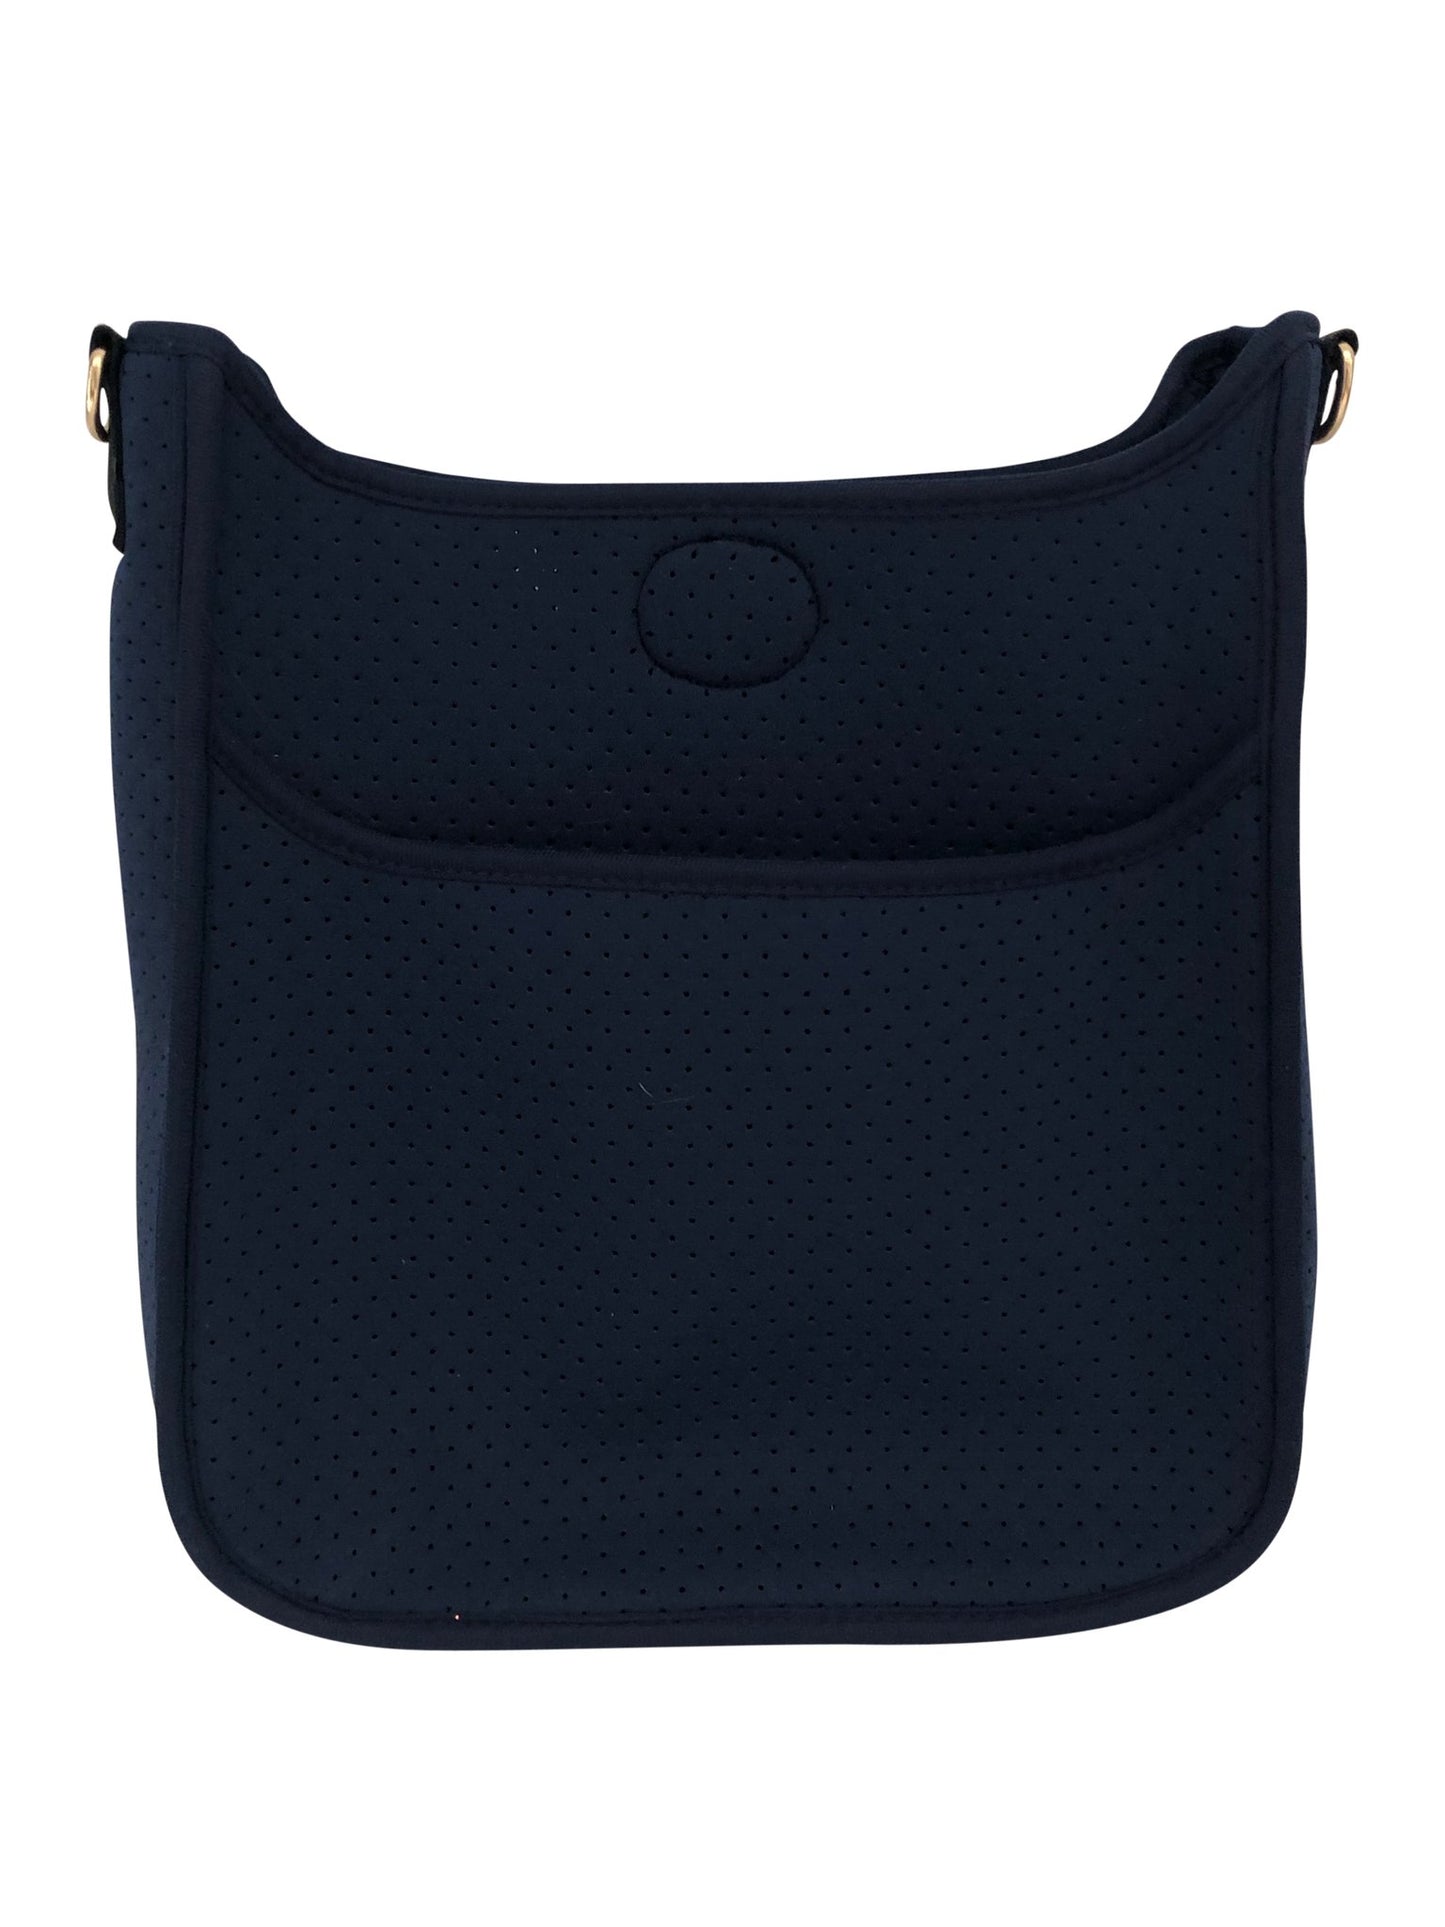 Navy Perforated Neoprene Messenger Bag - Strap Not Included